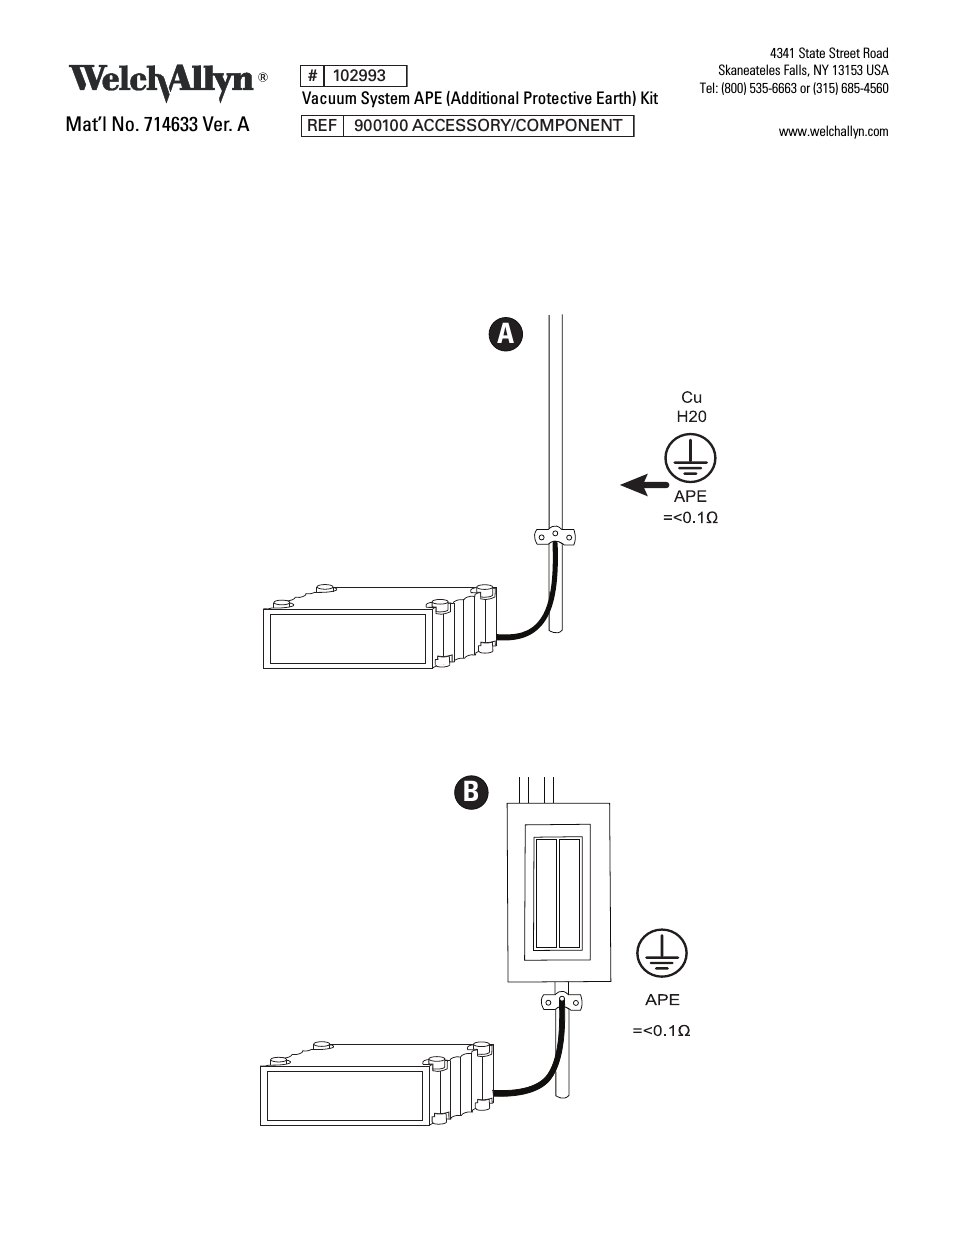 Vacuum System APE (Additional Protective Earth) Kit - Installation Guide